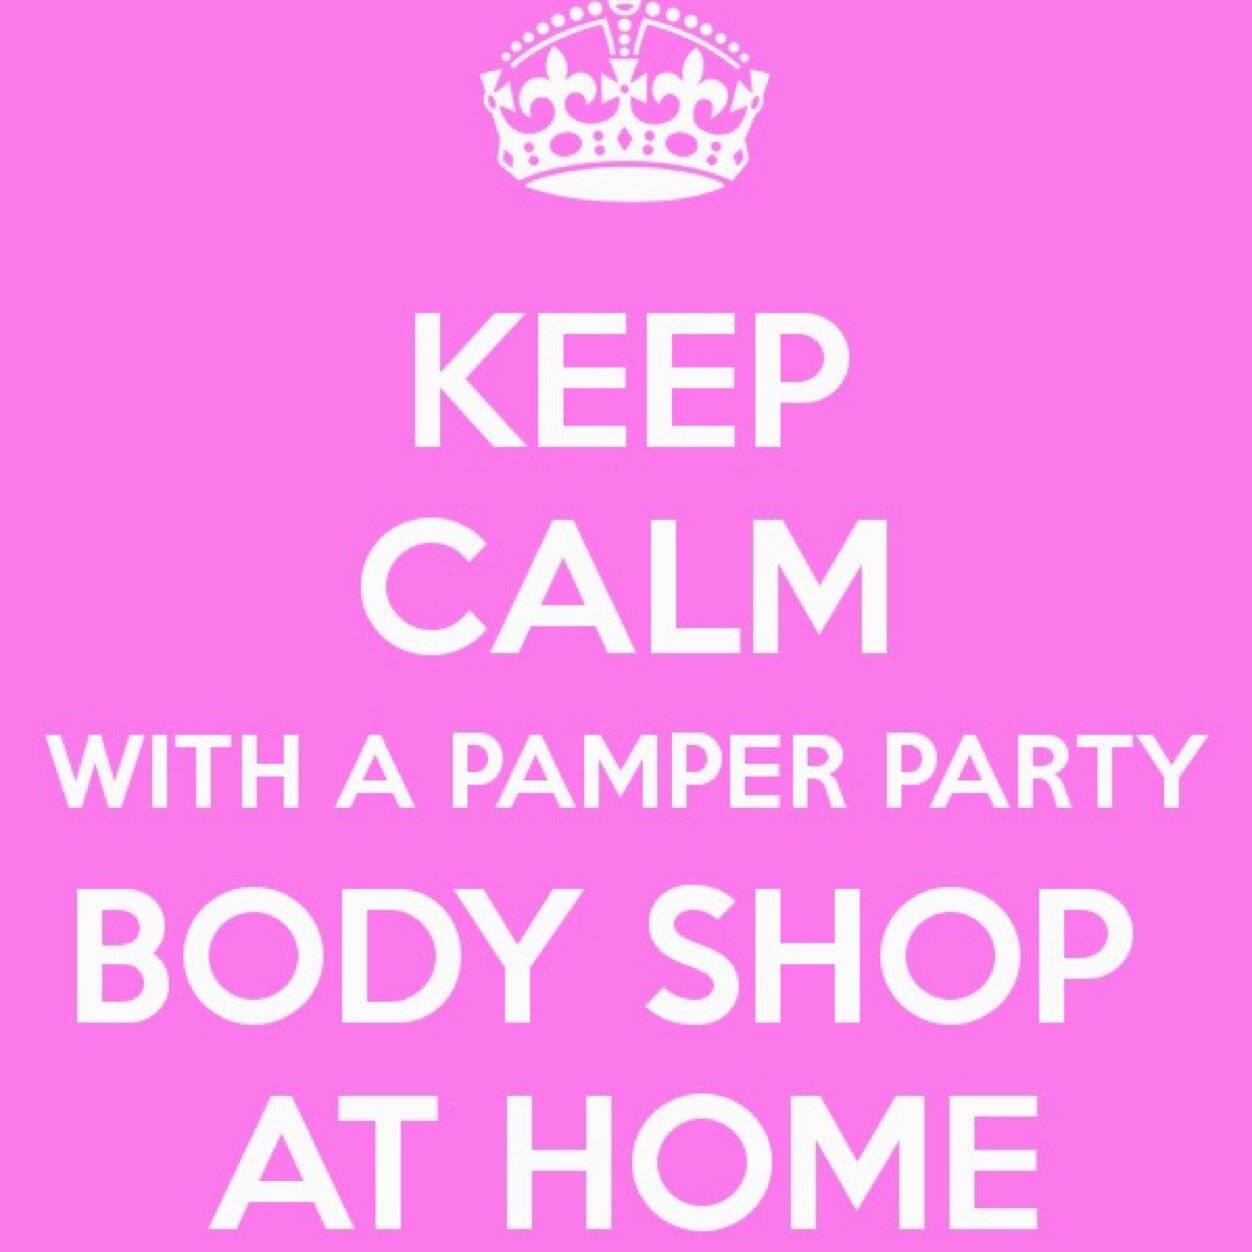 How would you like to receive a free pamper, facial or mini makeover? Or earn £20- £25 per hour? Then come and join my Fab team. Tweet me for more details.